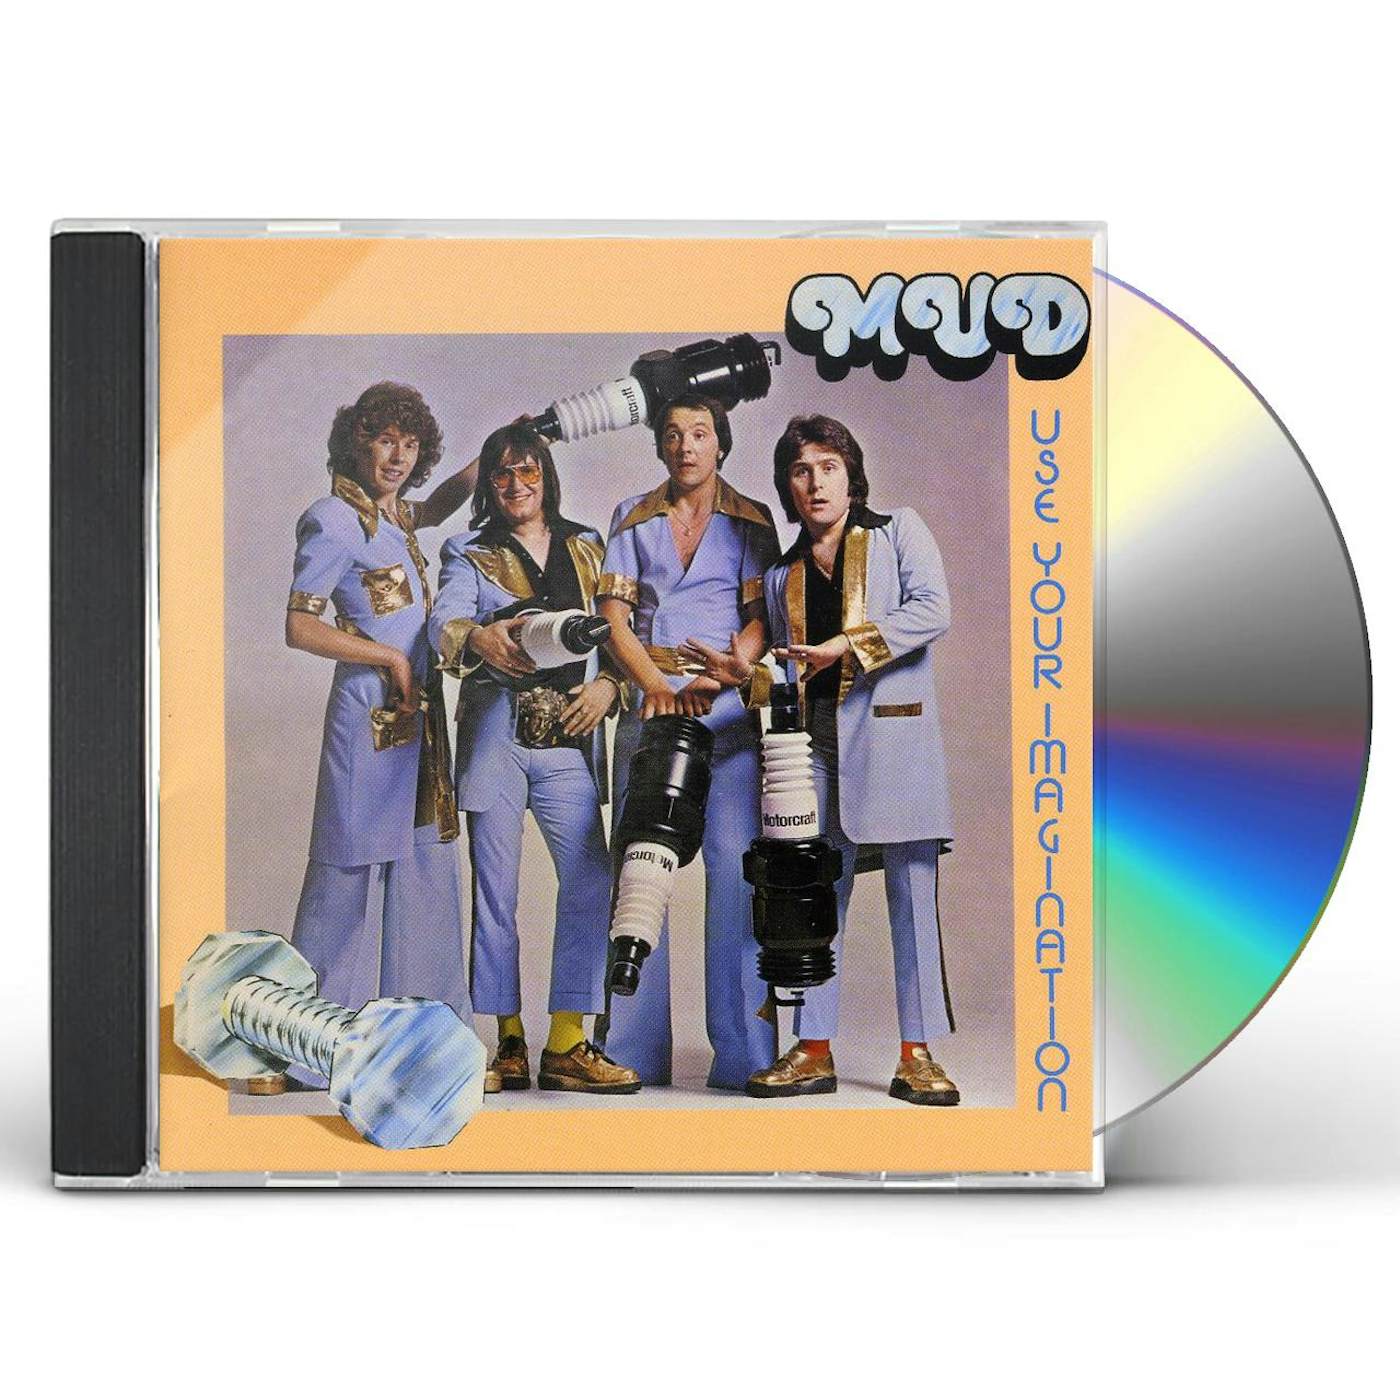 Mud USE YOUR IMAGINATION CD